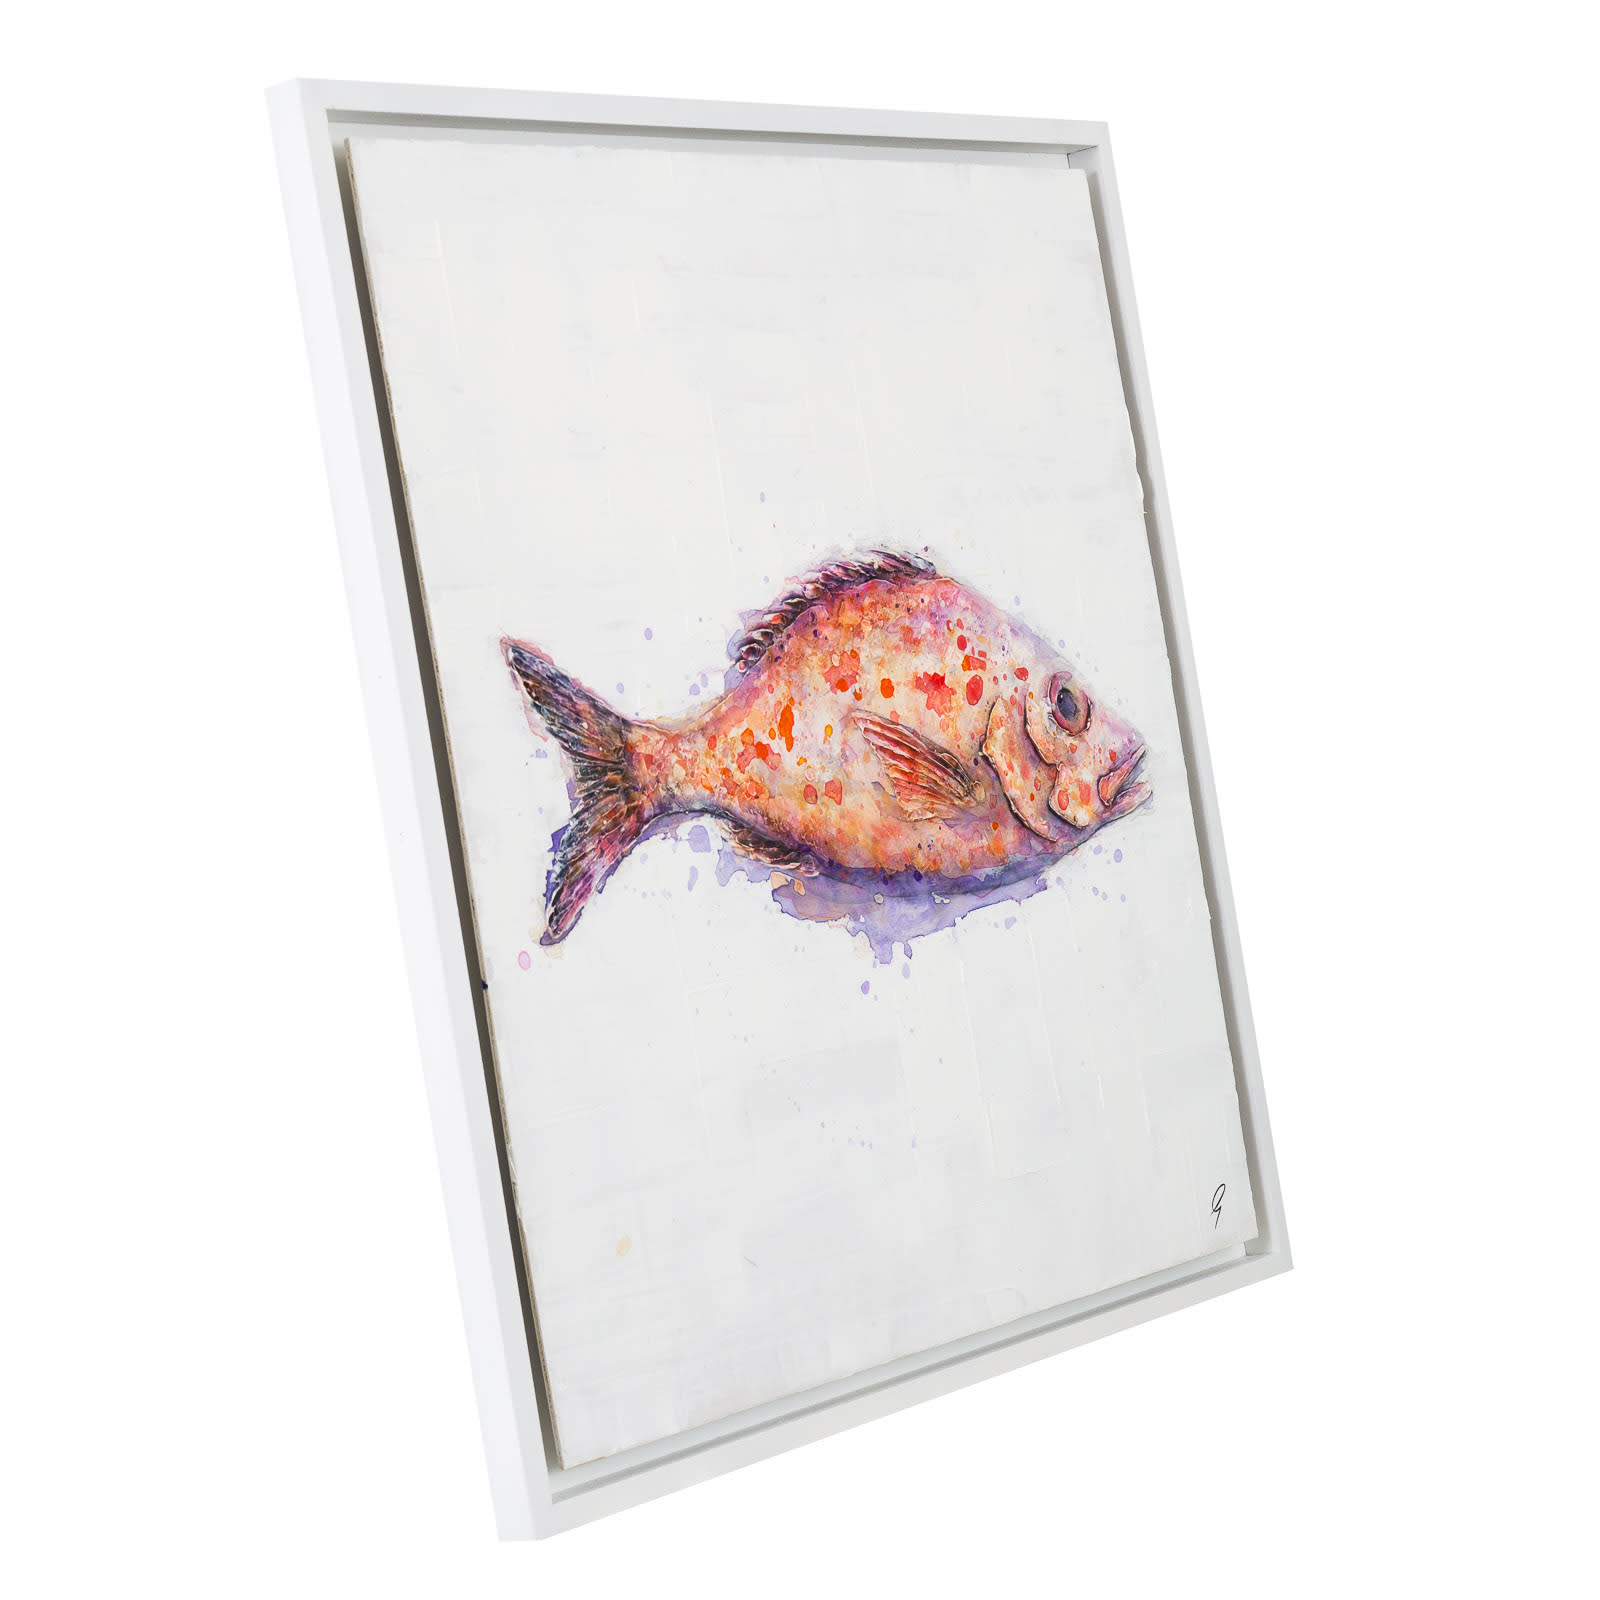 Red Snapper on Linen